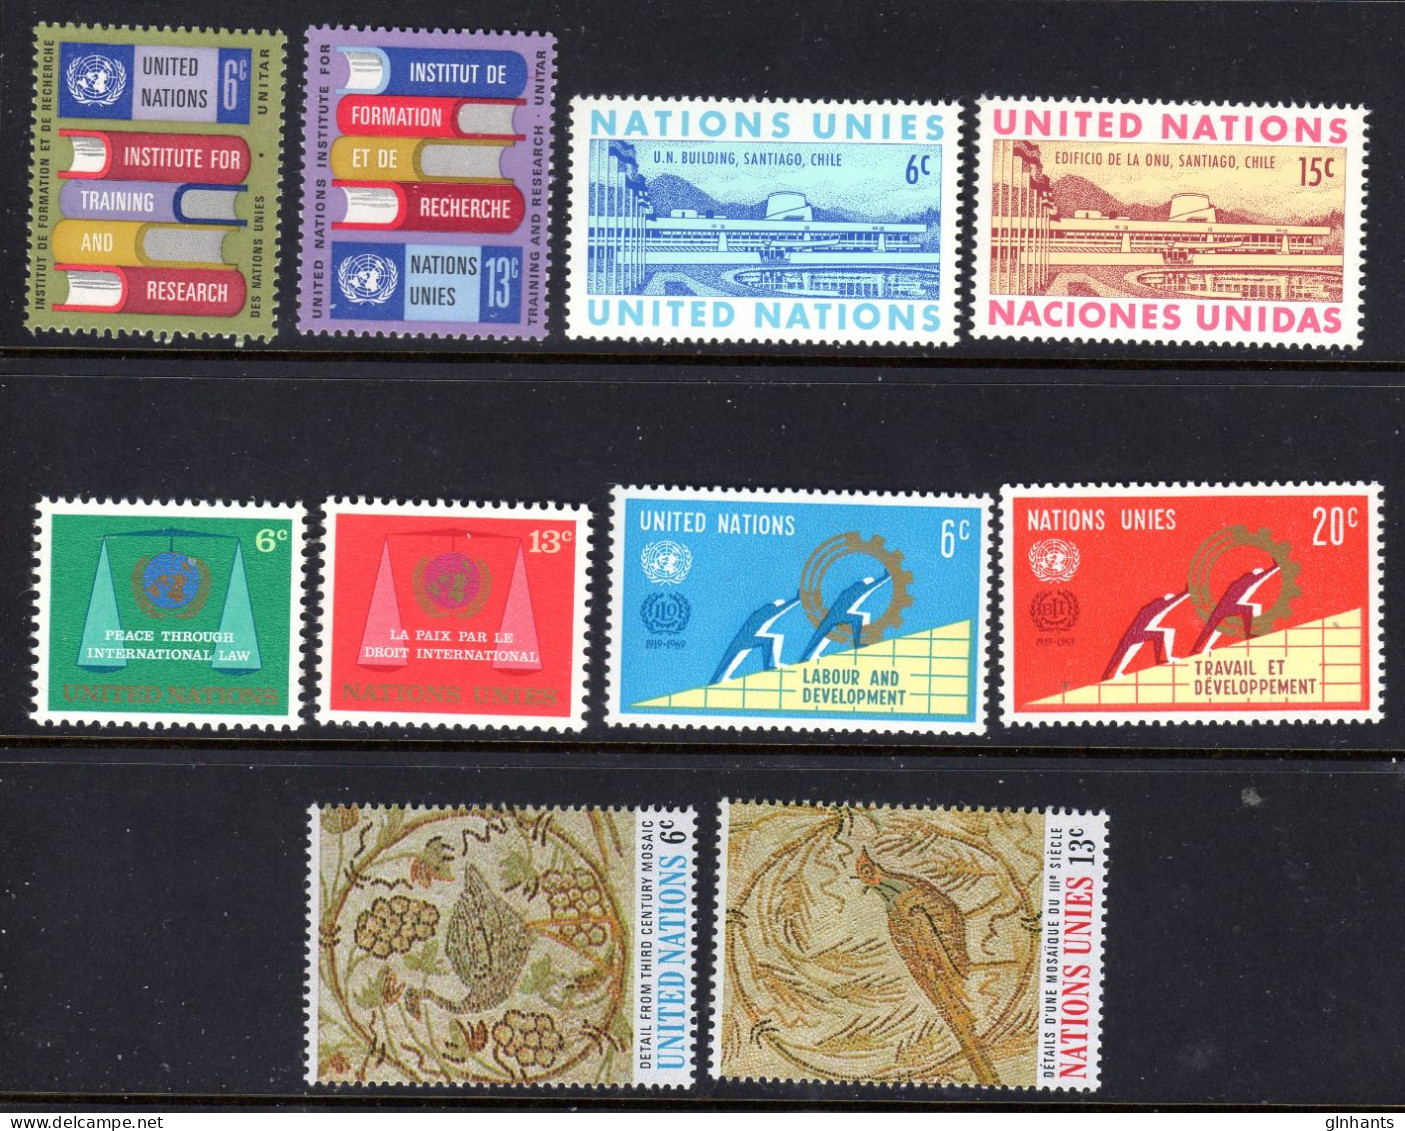 UNITED NATIONS UN NEW YORK - 1969 COMPLETE YEAR SET (10V) AS PICTURED FINE MNH ** SG 193-202 - Nuovi